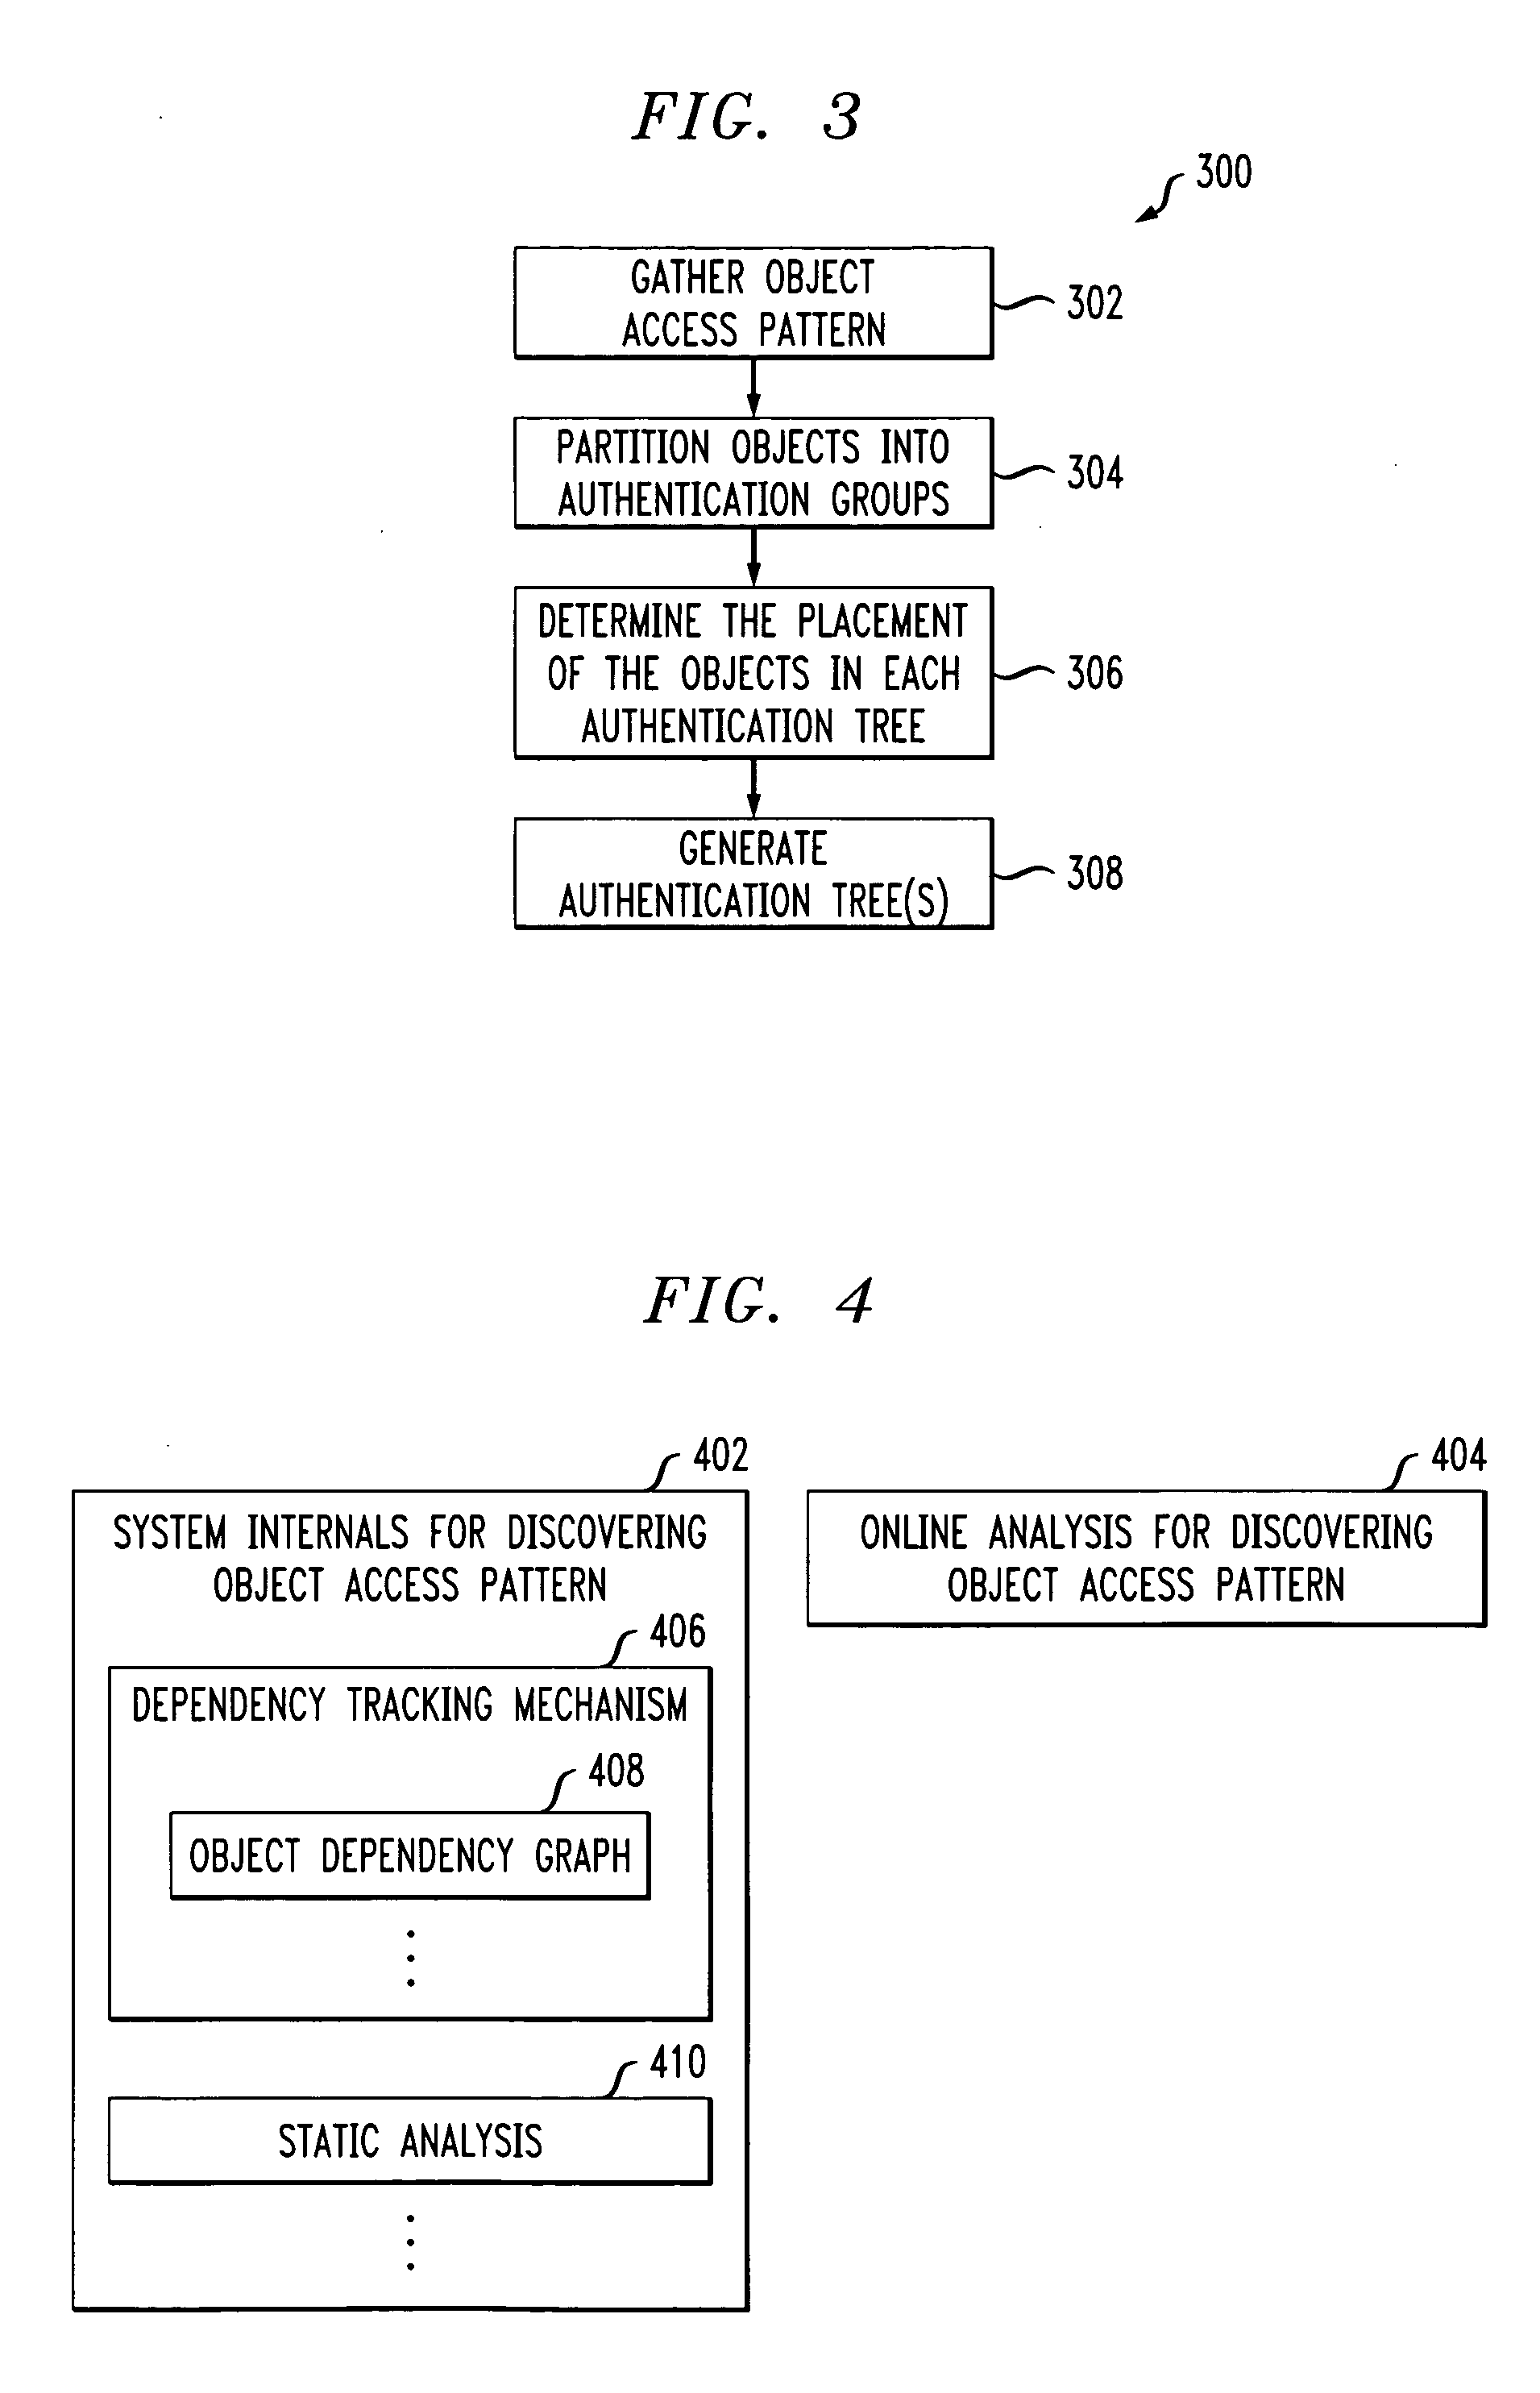 Systems and methods for efficiently authenticating multiple objects based on access patterns